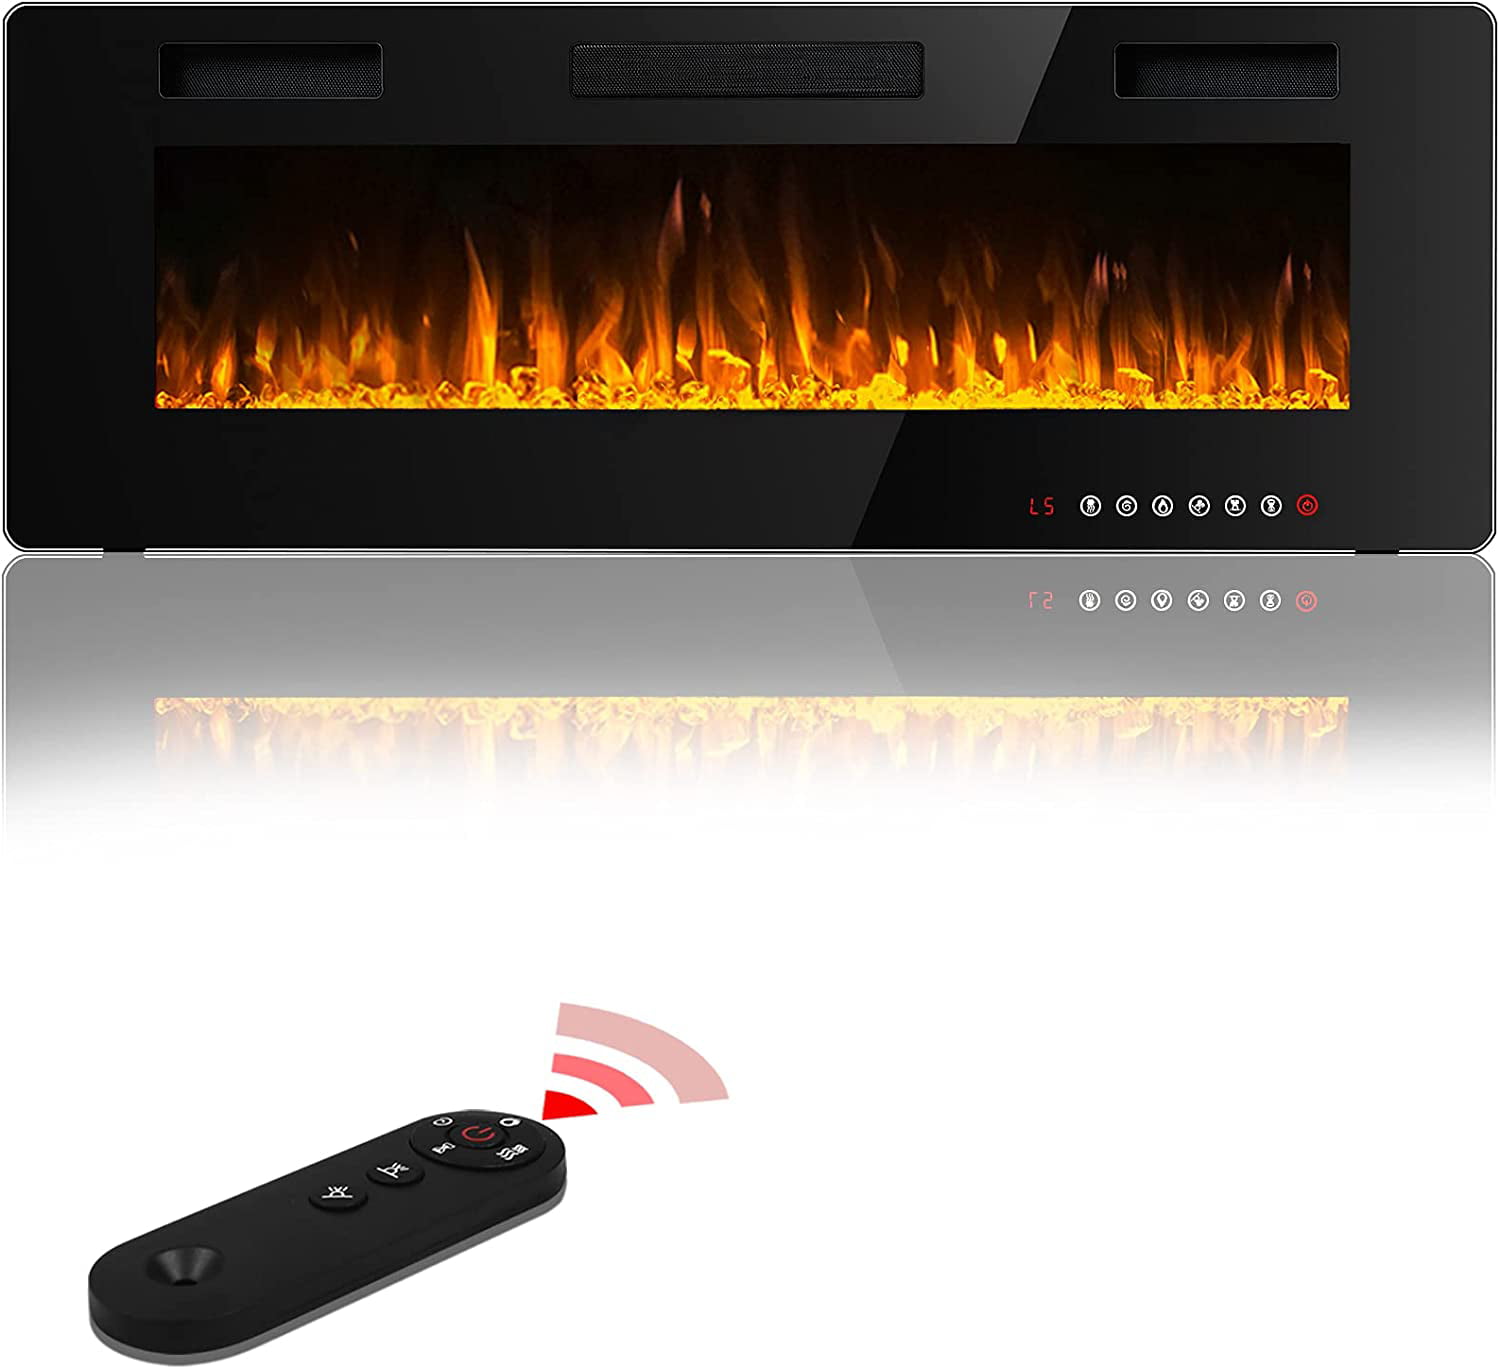 Orren Ellis Razo Curved Wall Mounted Electric Fireplace Review - Top Ten  Reviews